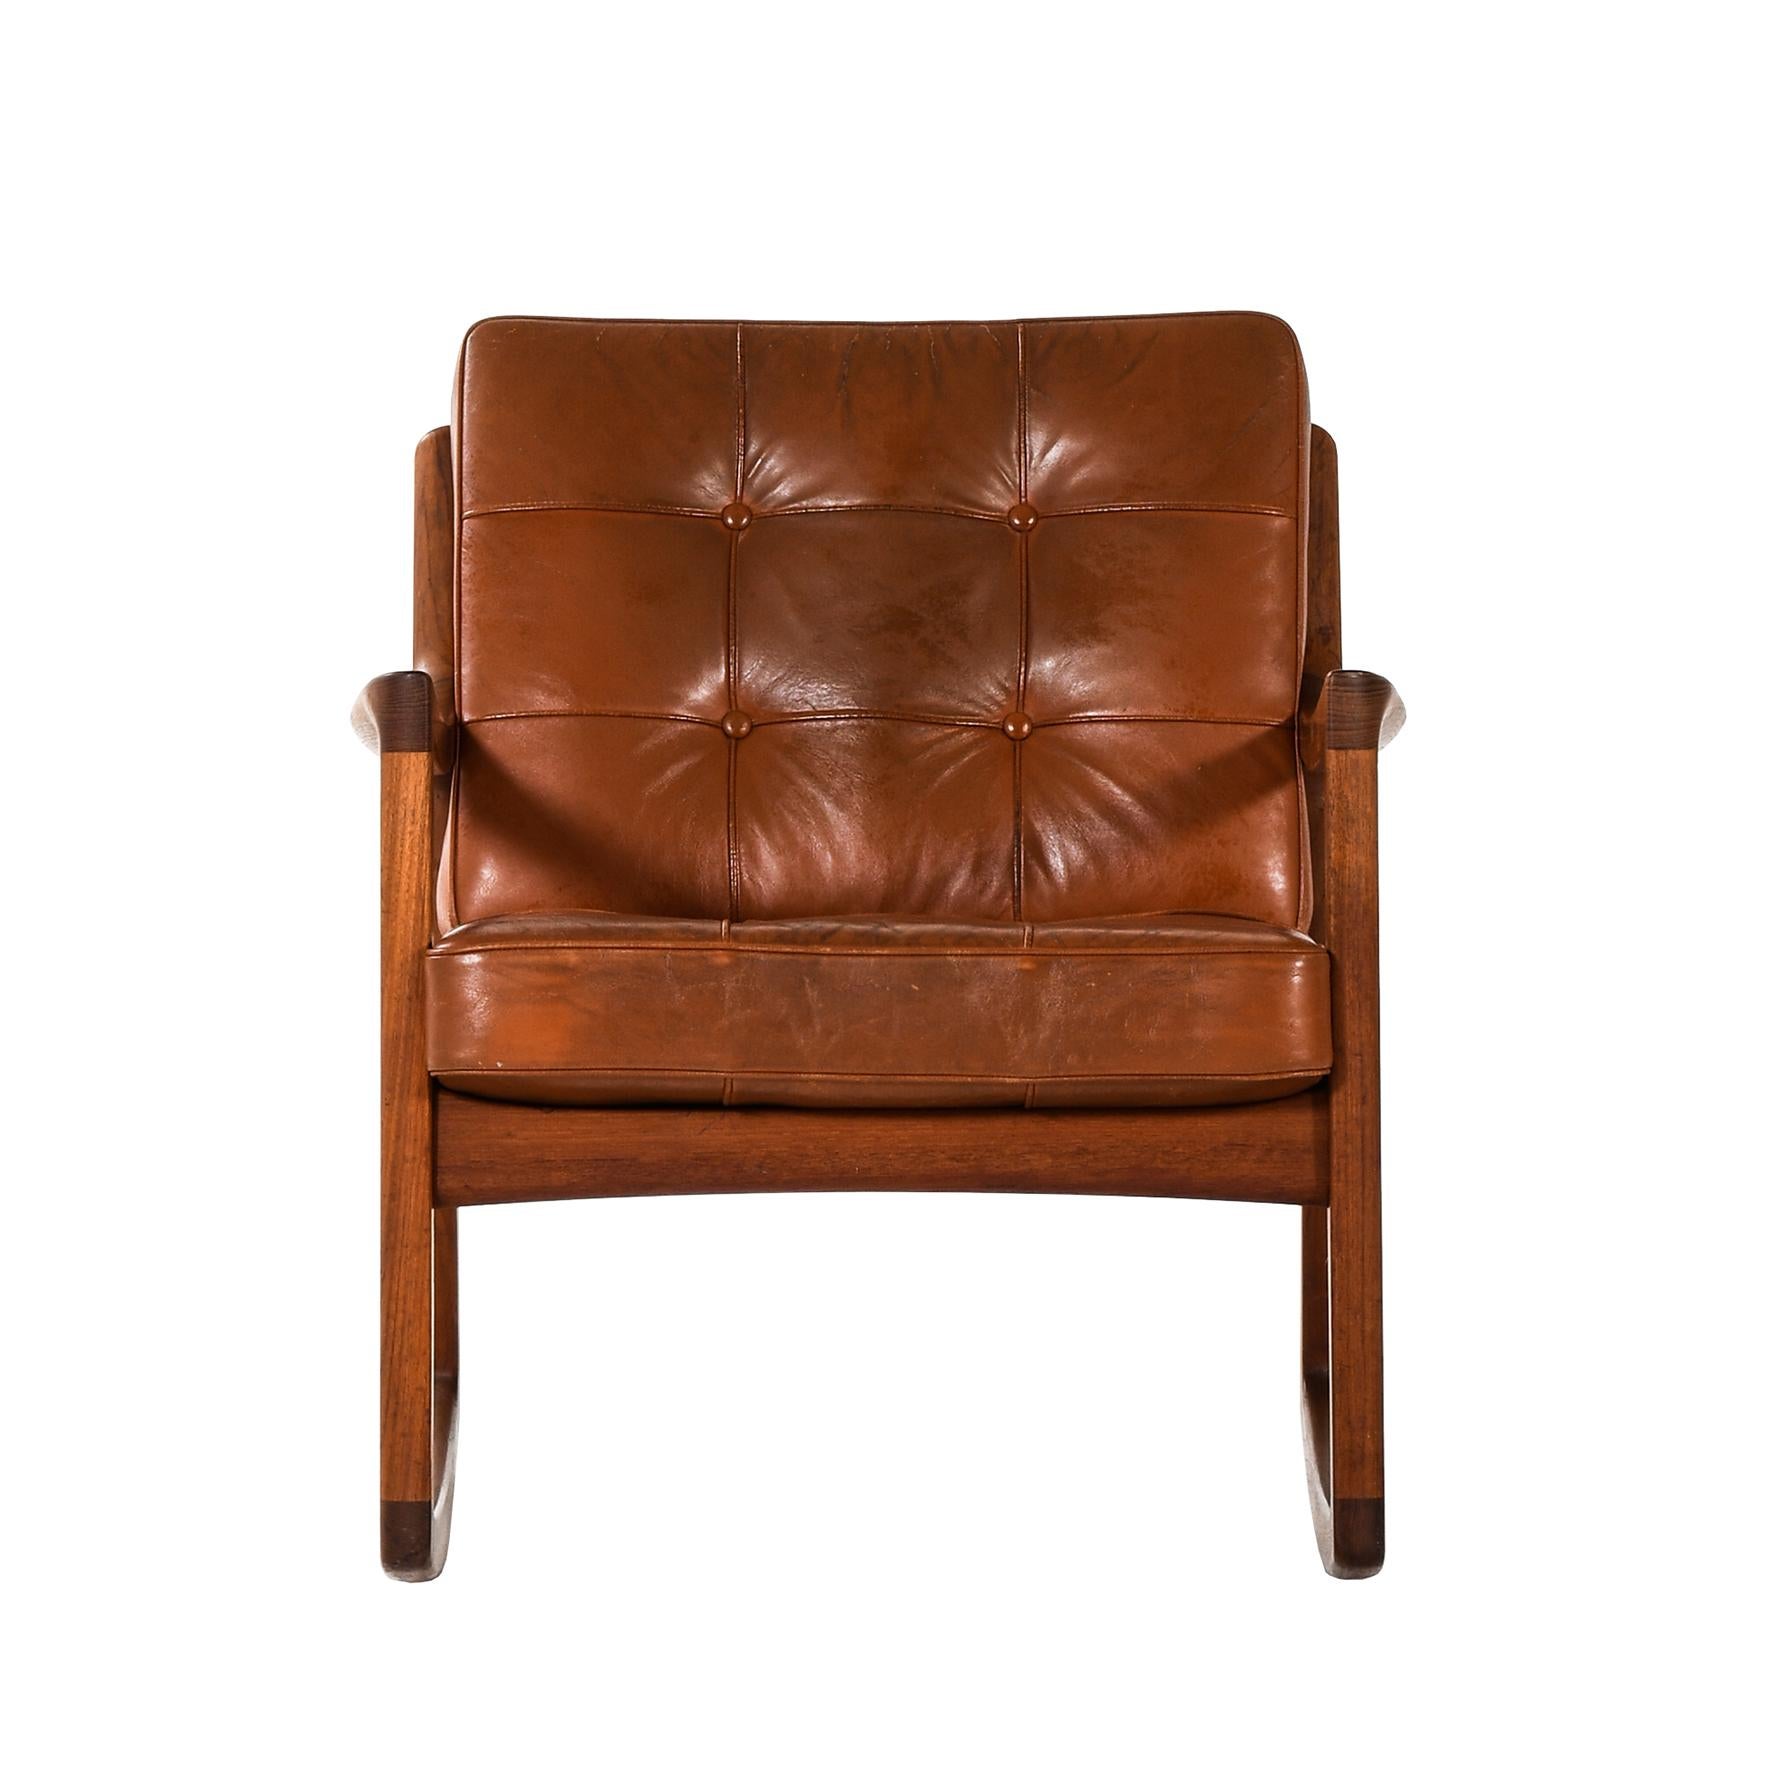 Ole Wanscher

Senator

A teak and brown leather armchair.
With a France & Søn mark.
Produced by France & Søn, Denmark, 1960s.


Dimensions

Height : 77 cm Width : 68 cm Depth : 77 cm
Height of seat : 43 cm